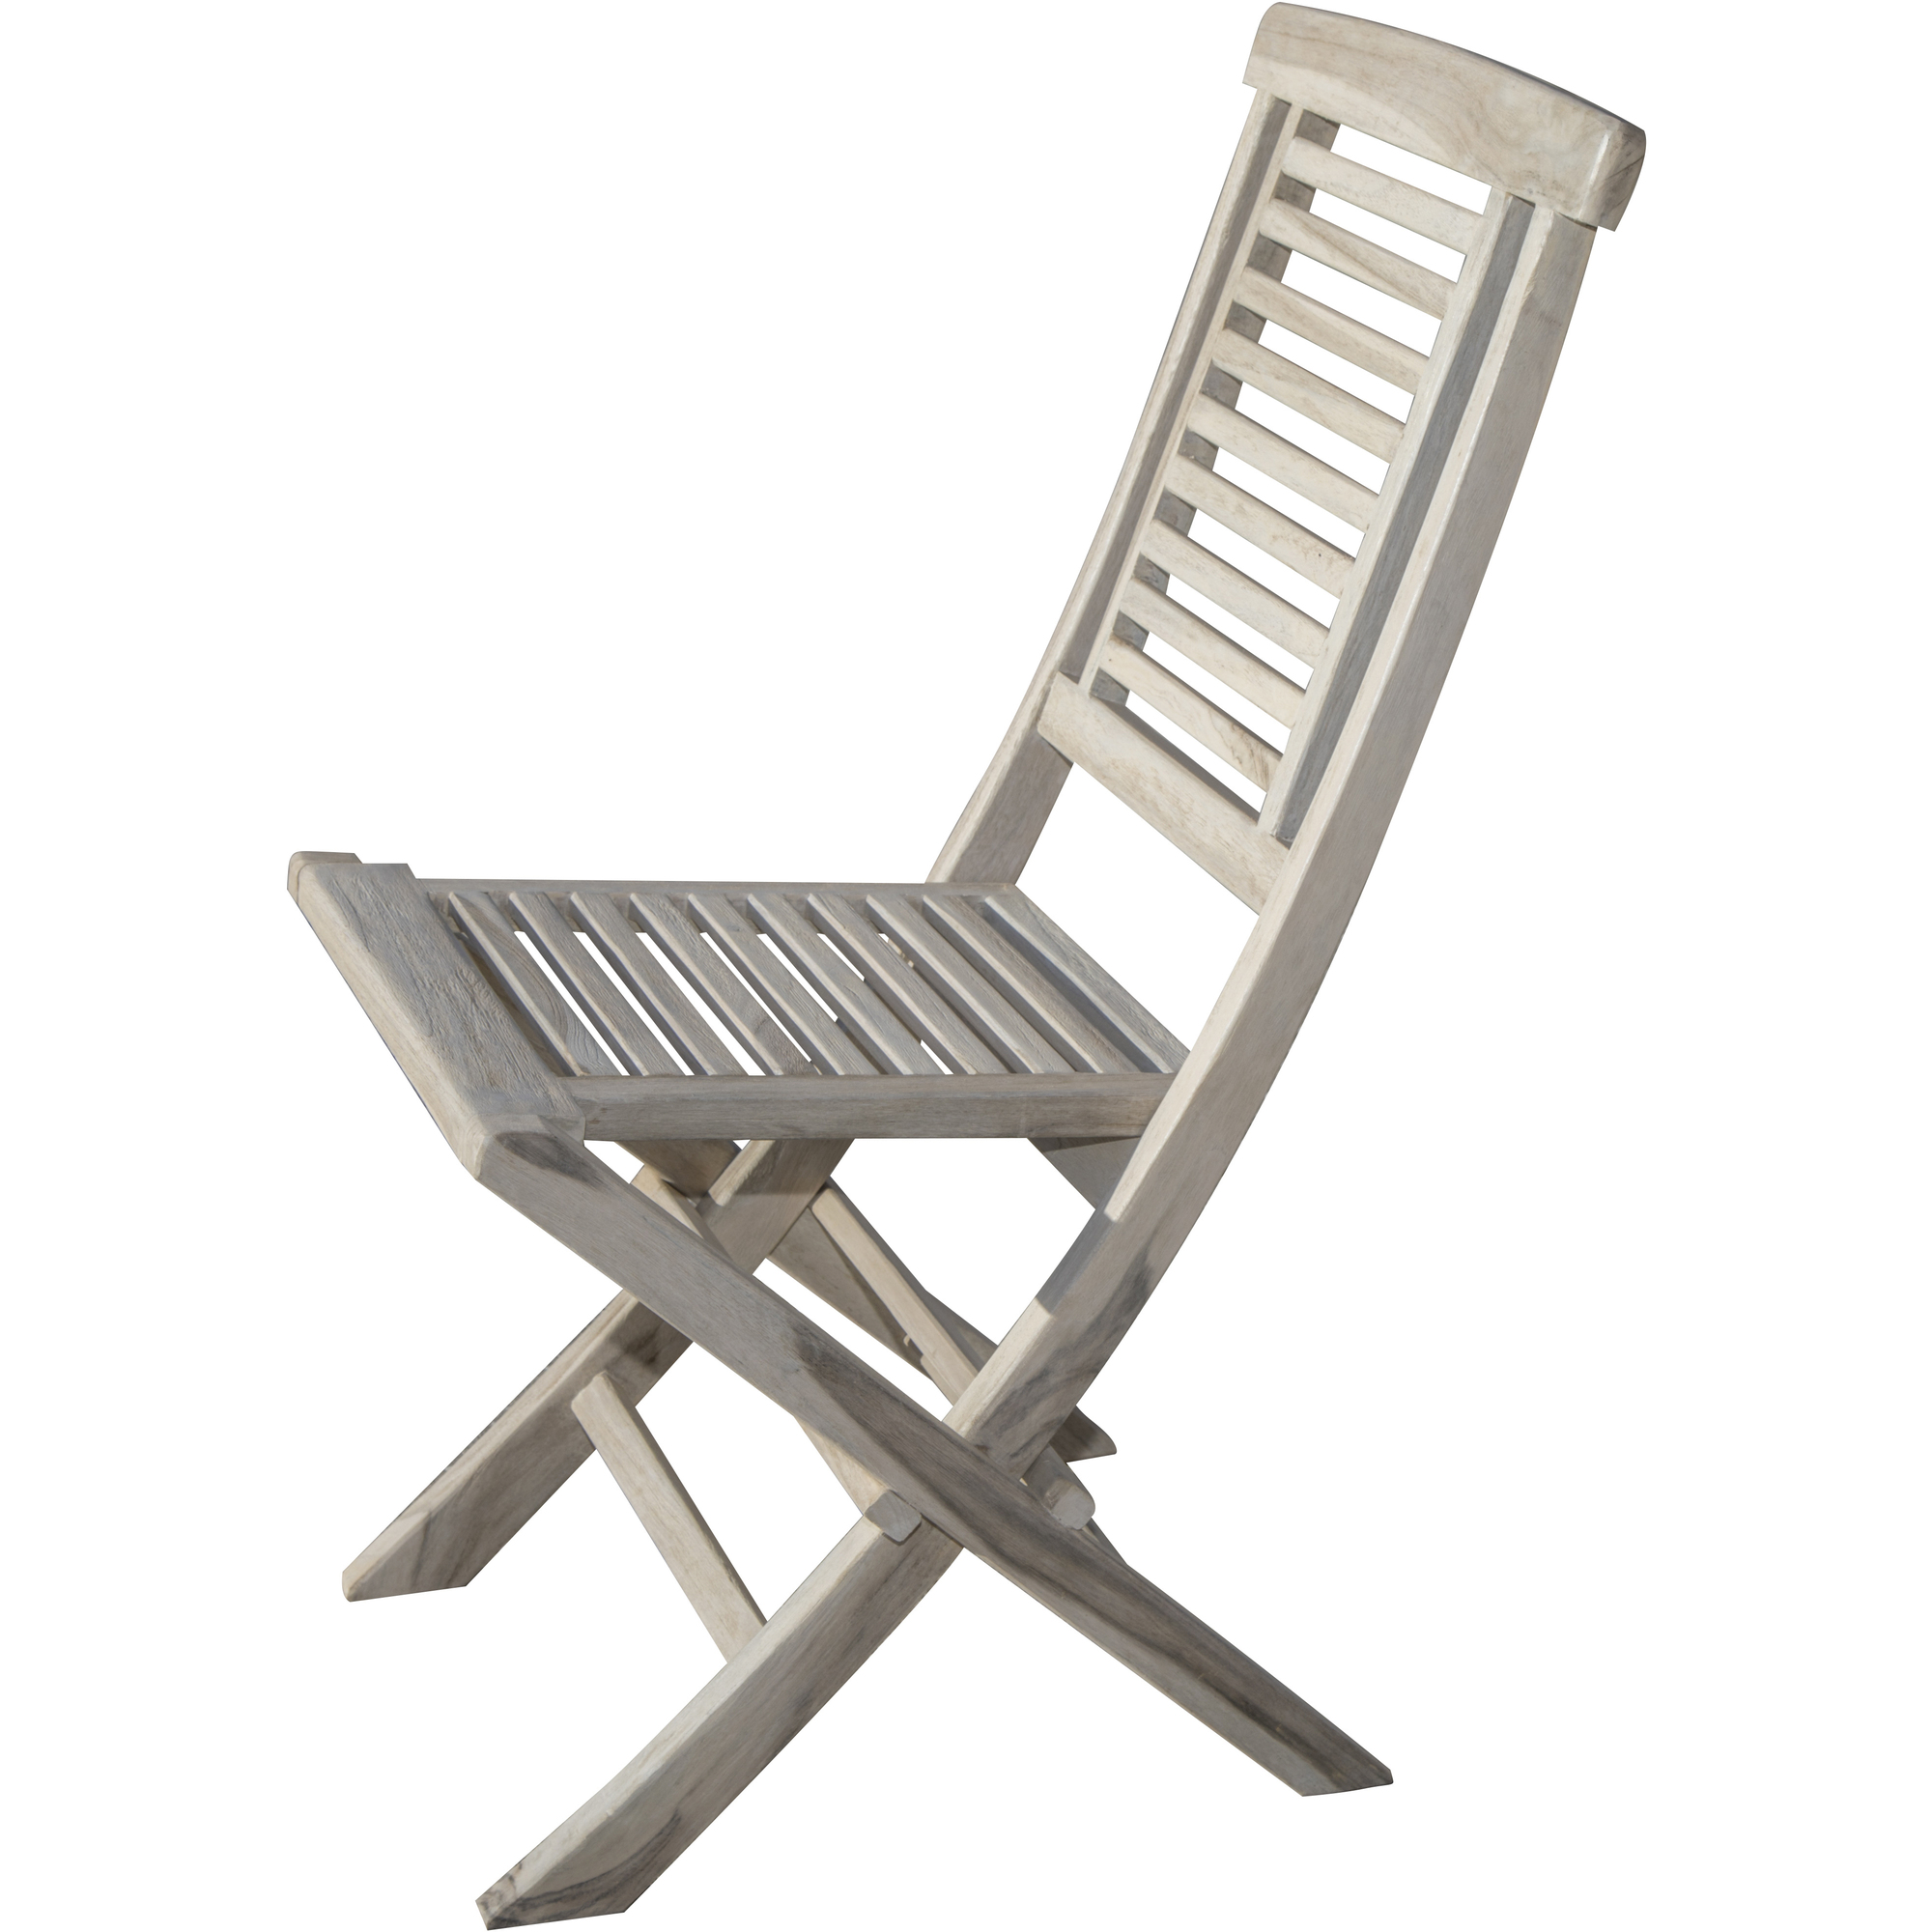 Compact Teak Folding Chair in Driftwood Finish